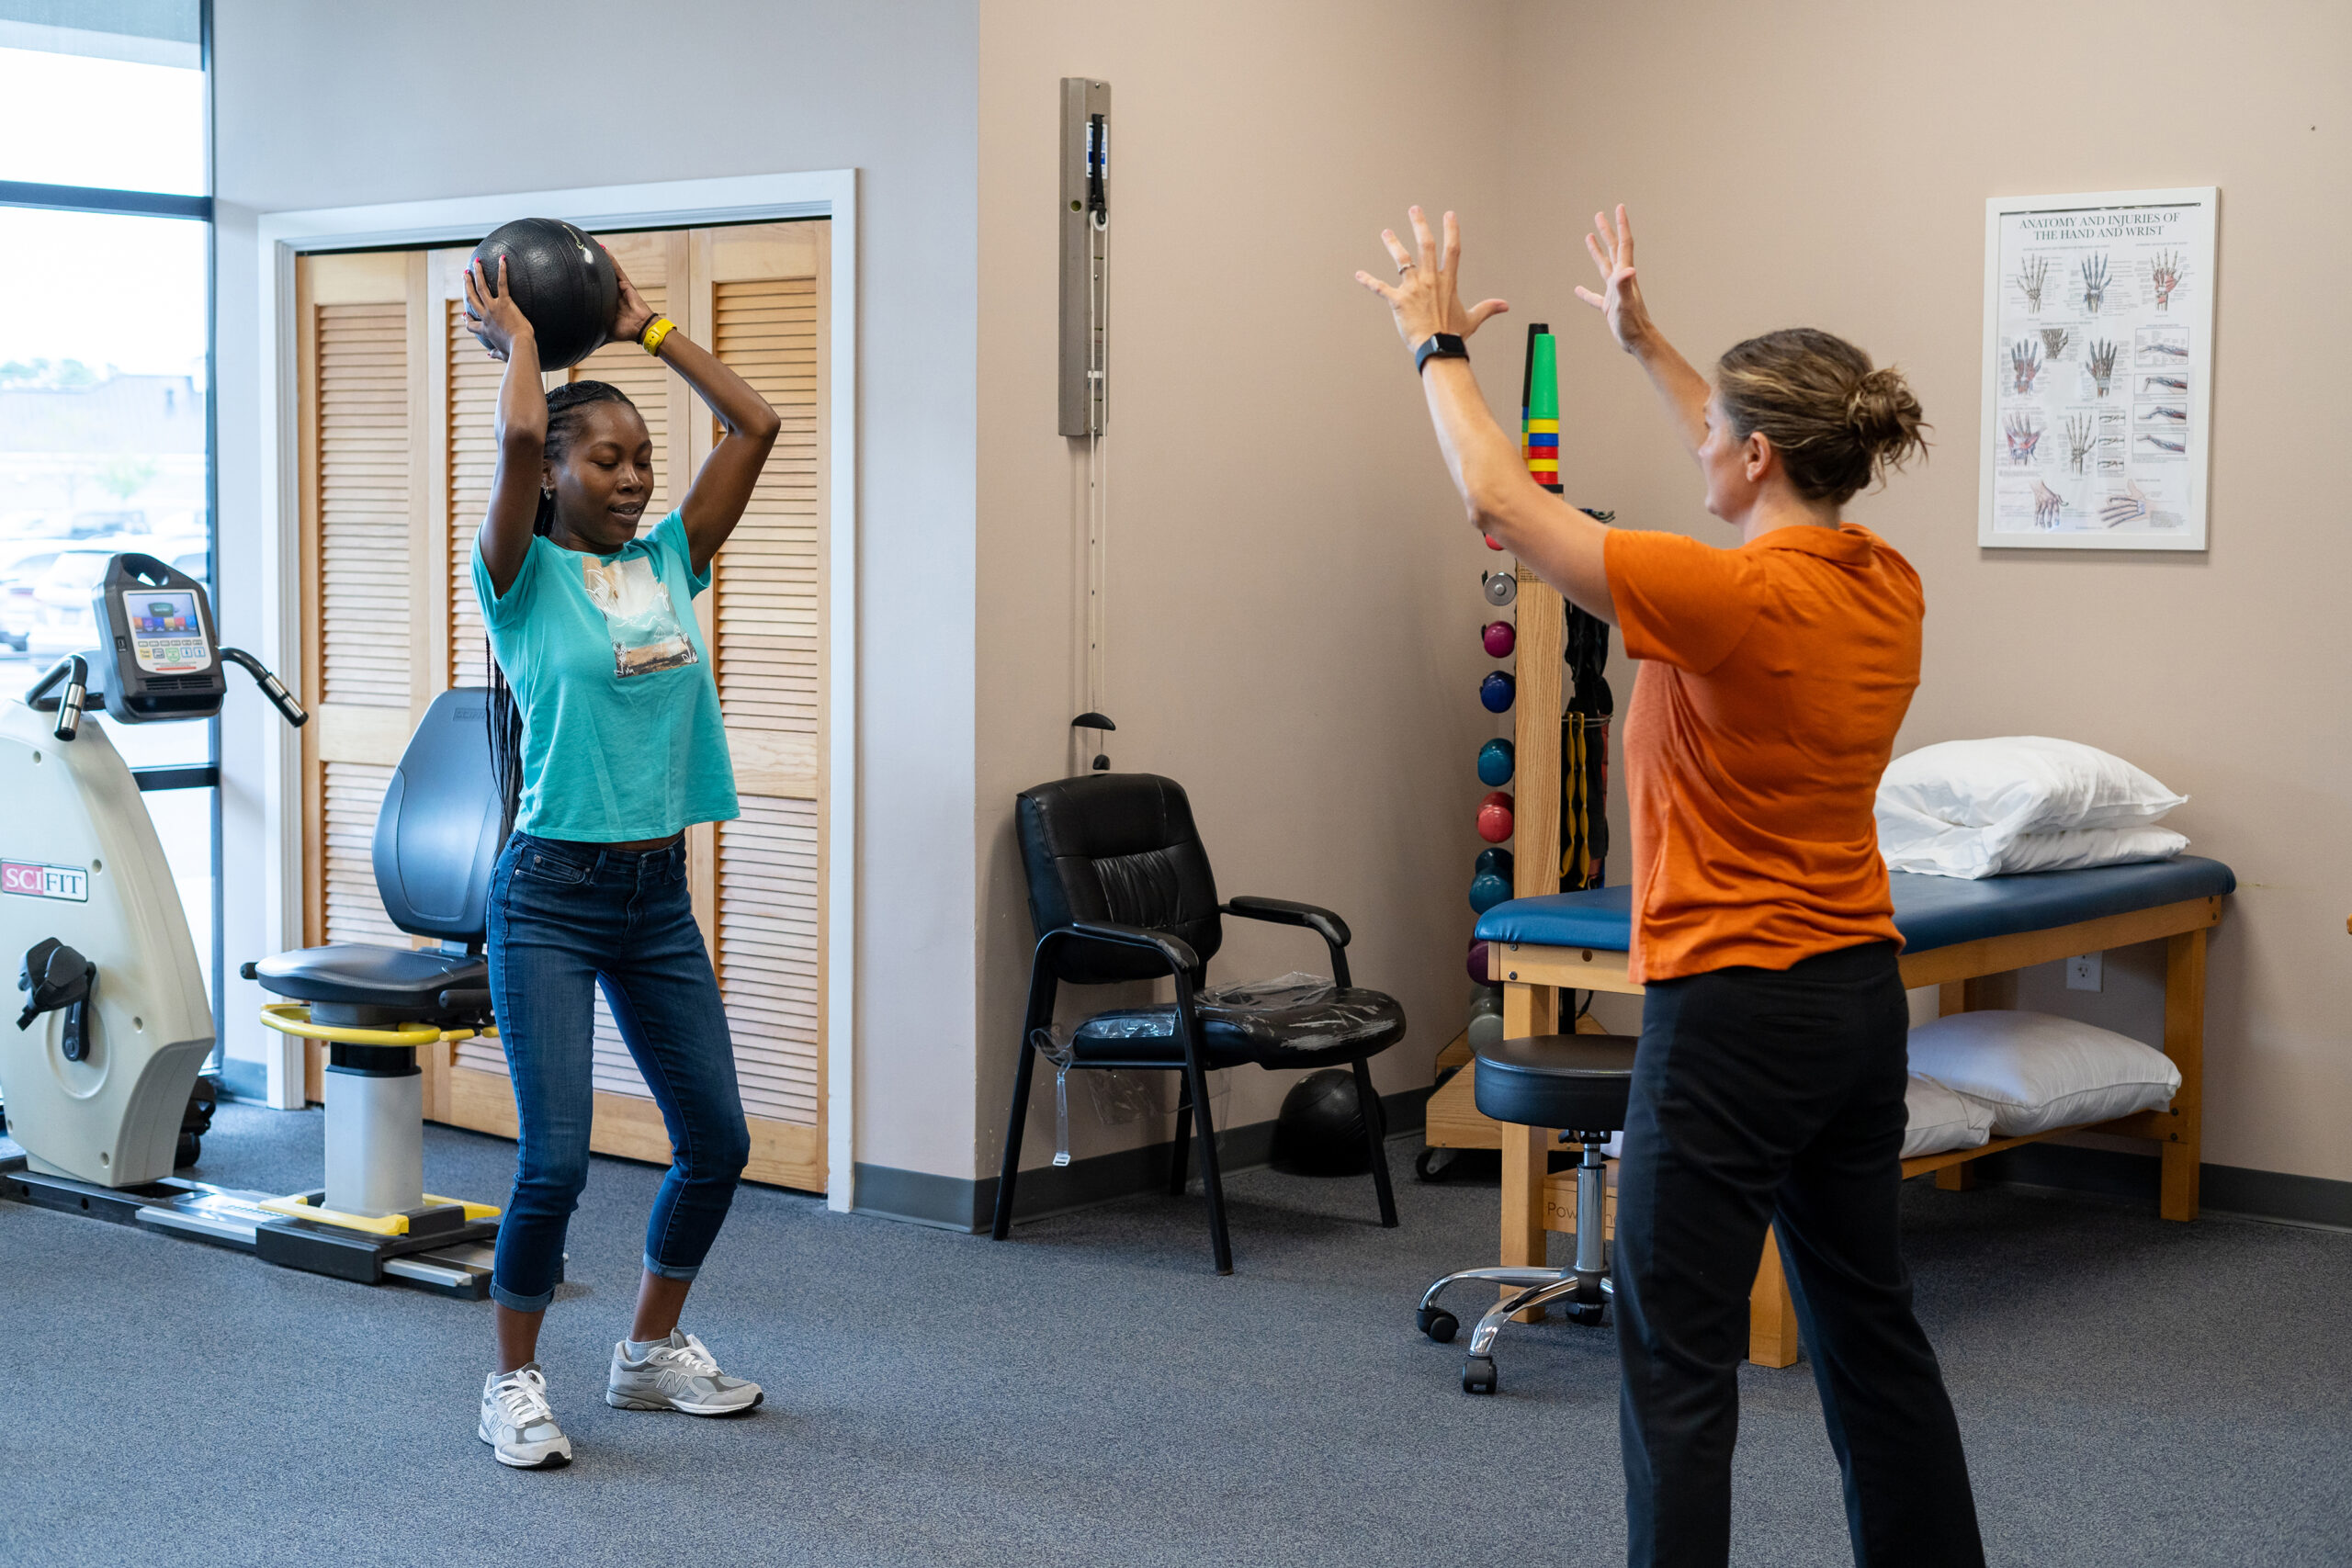 two people in a room with exercise equipment